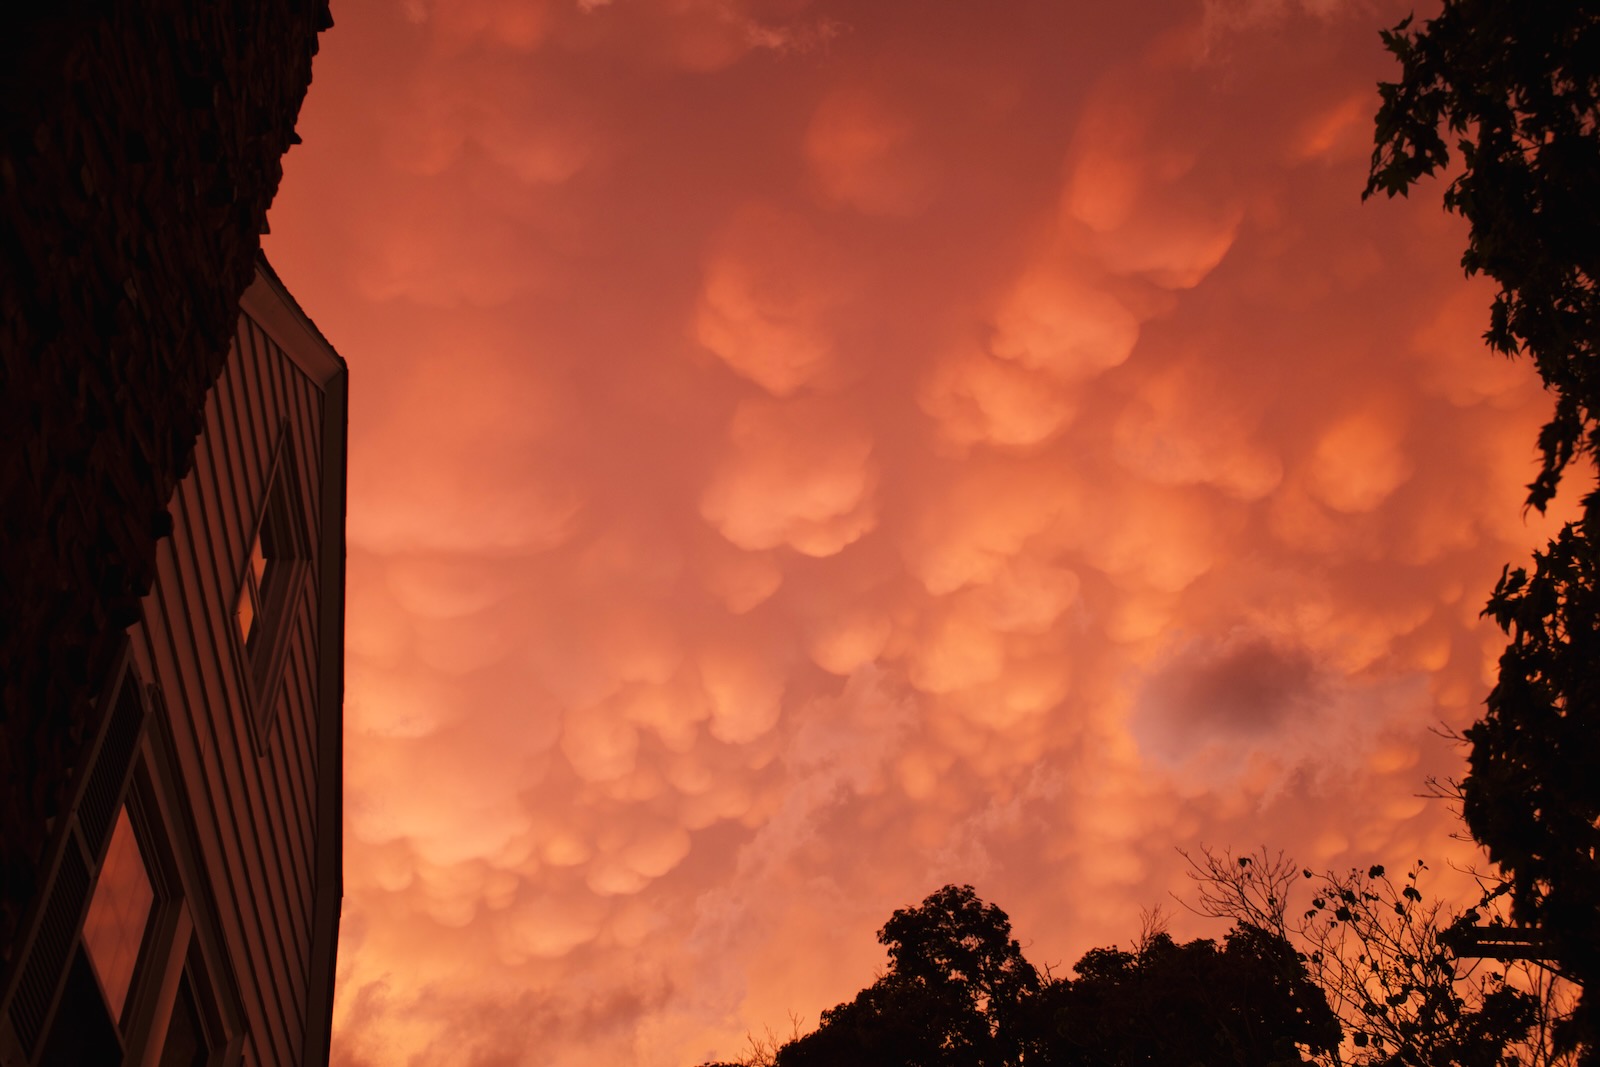 A sky during a reddish sunset, dotted by little puffy clouds—like someone took cotton balls and placed them in the sky.